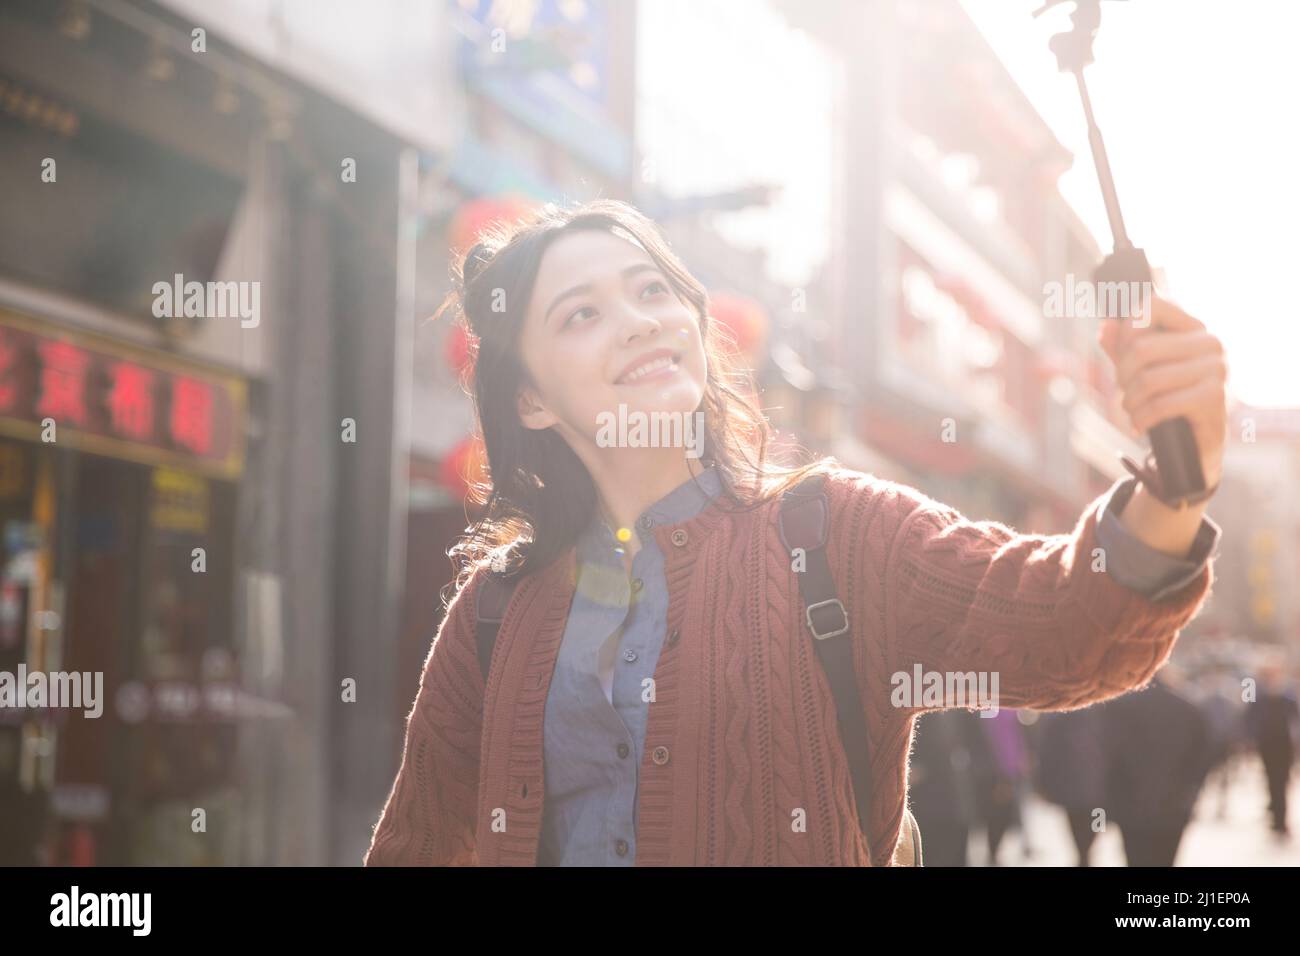 Female backpacker taking selfie at classic style pedestrian street - stock photo Stock Photo